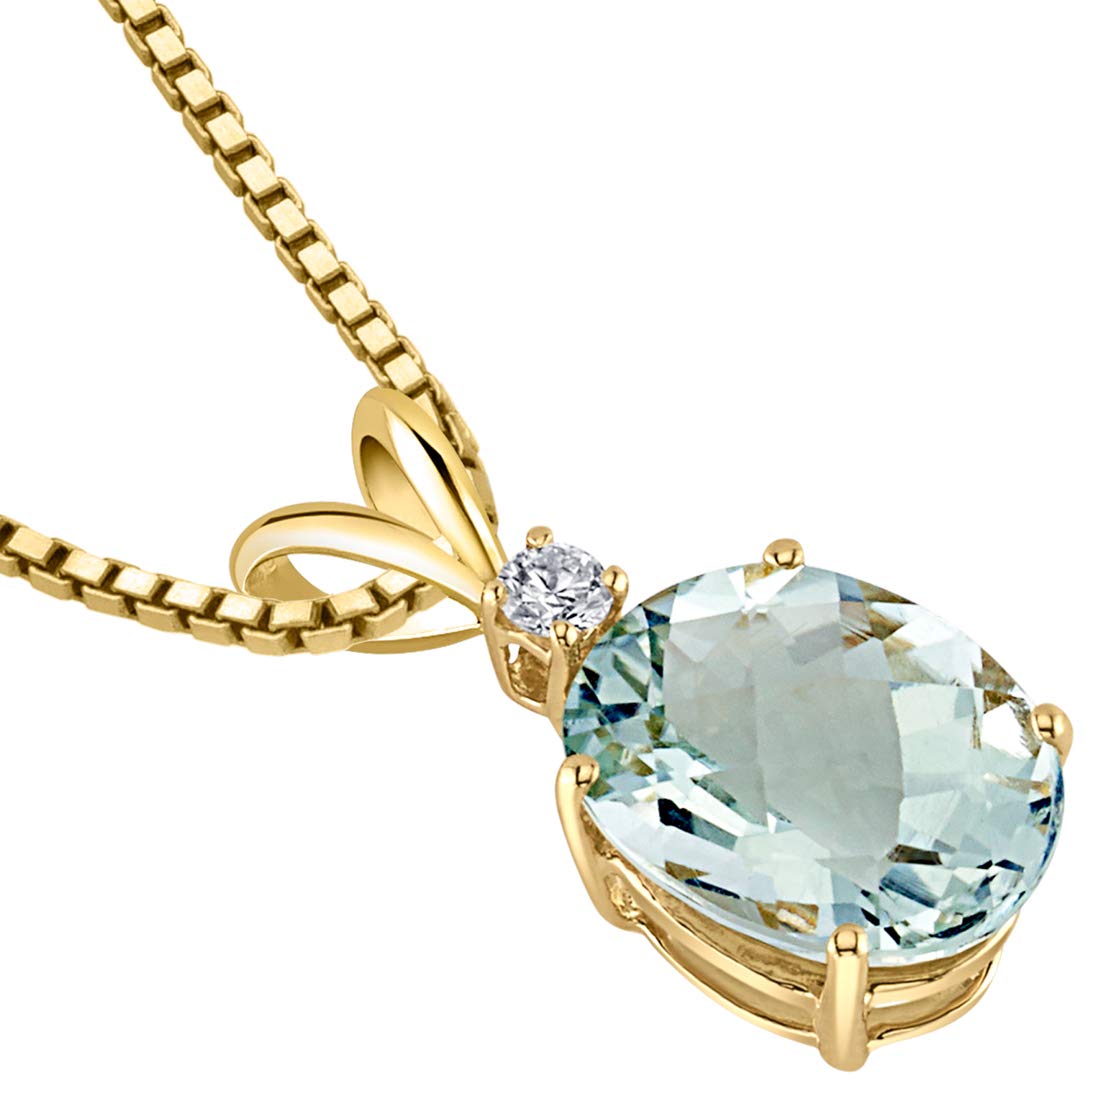 Peora Green Amethyst with Genuine Diamond Pendant in 14K Yellow Gold, Elegant Solitaire, Oval Shape, 10x8mm, 2.30Carats total